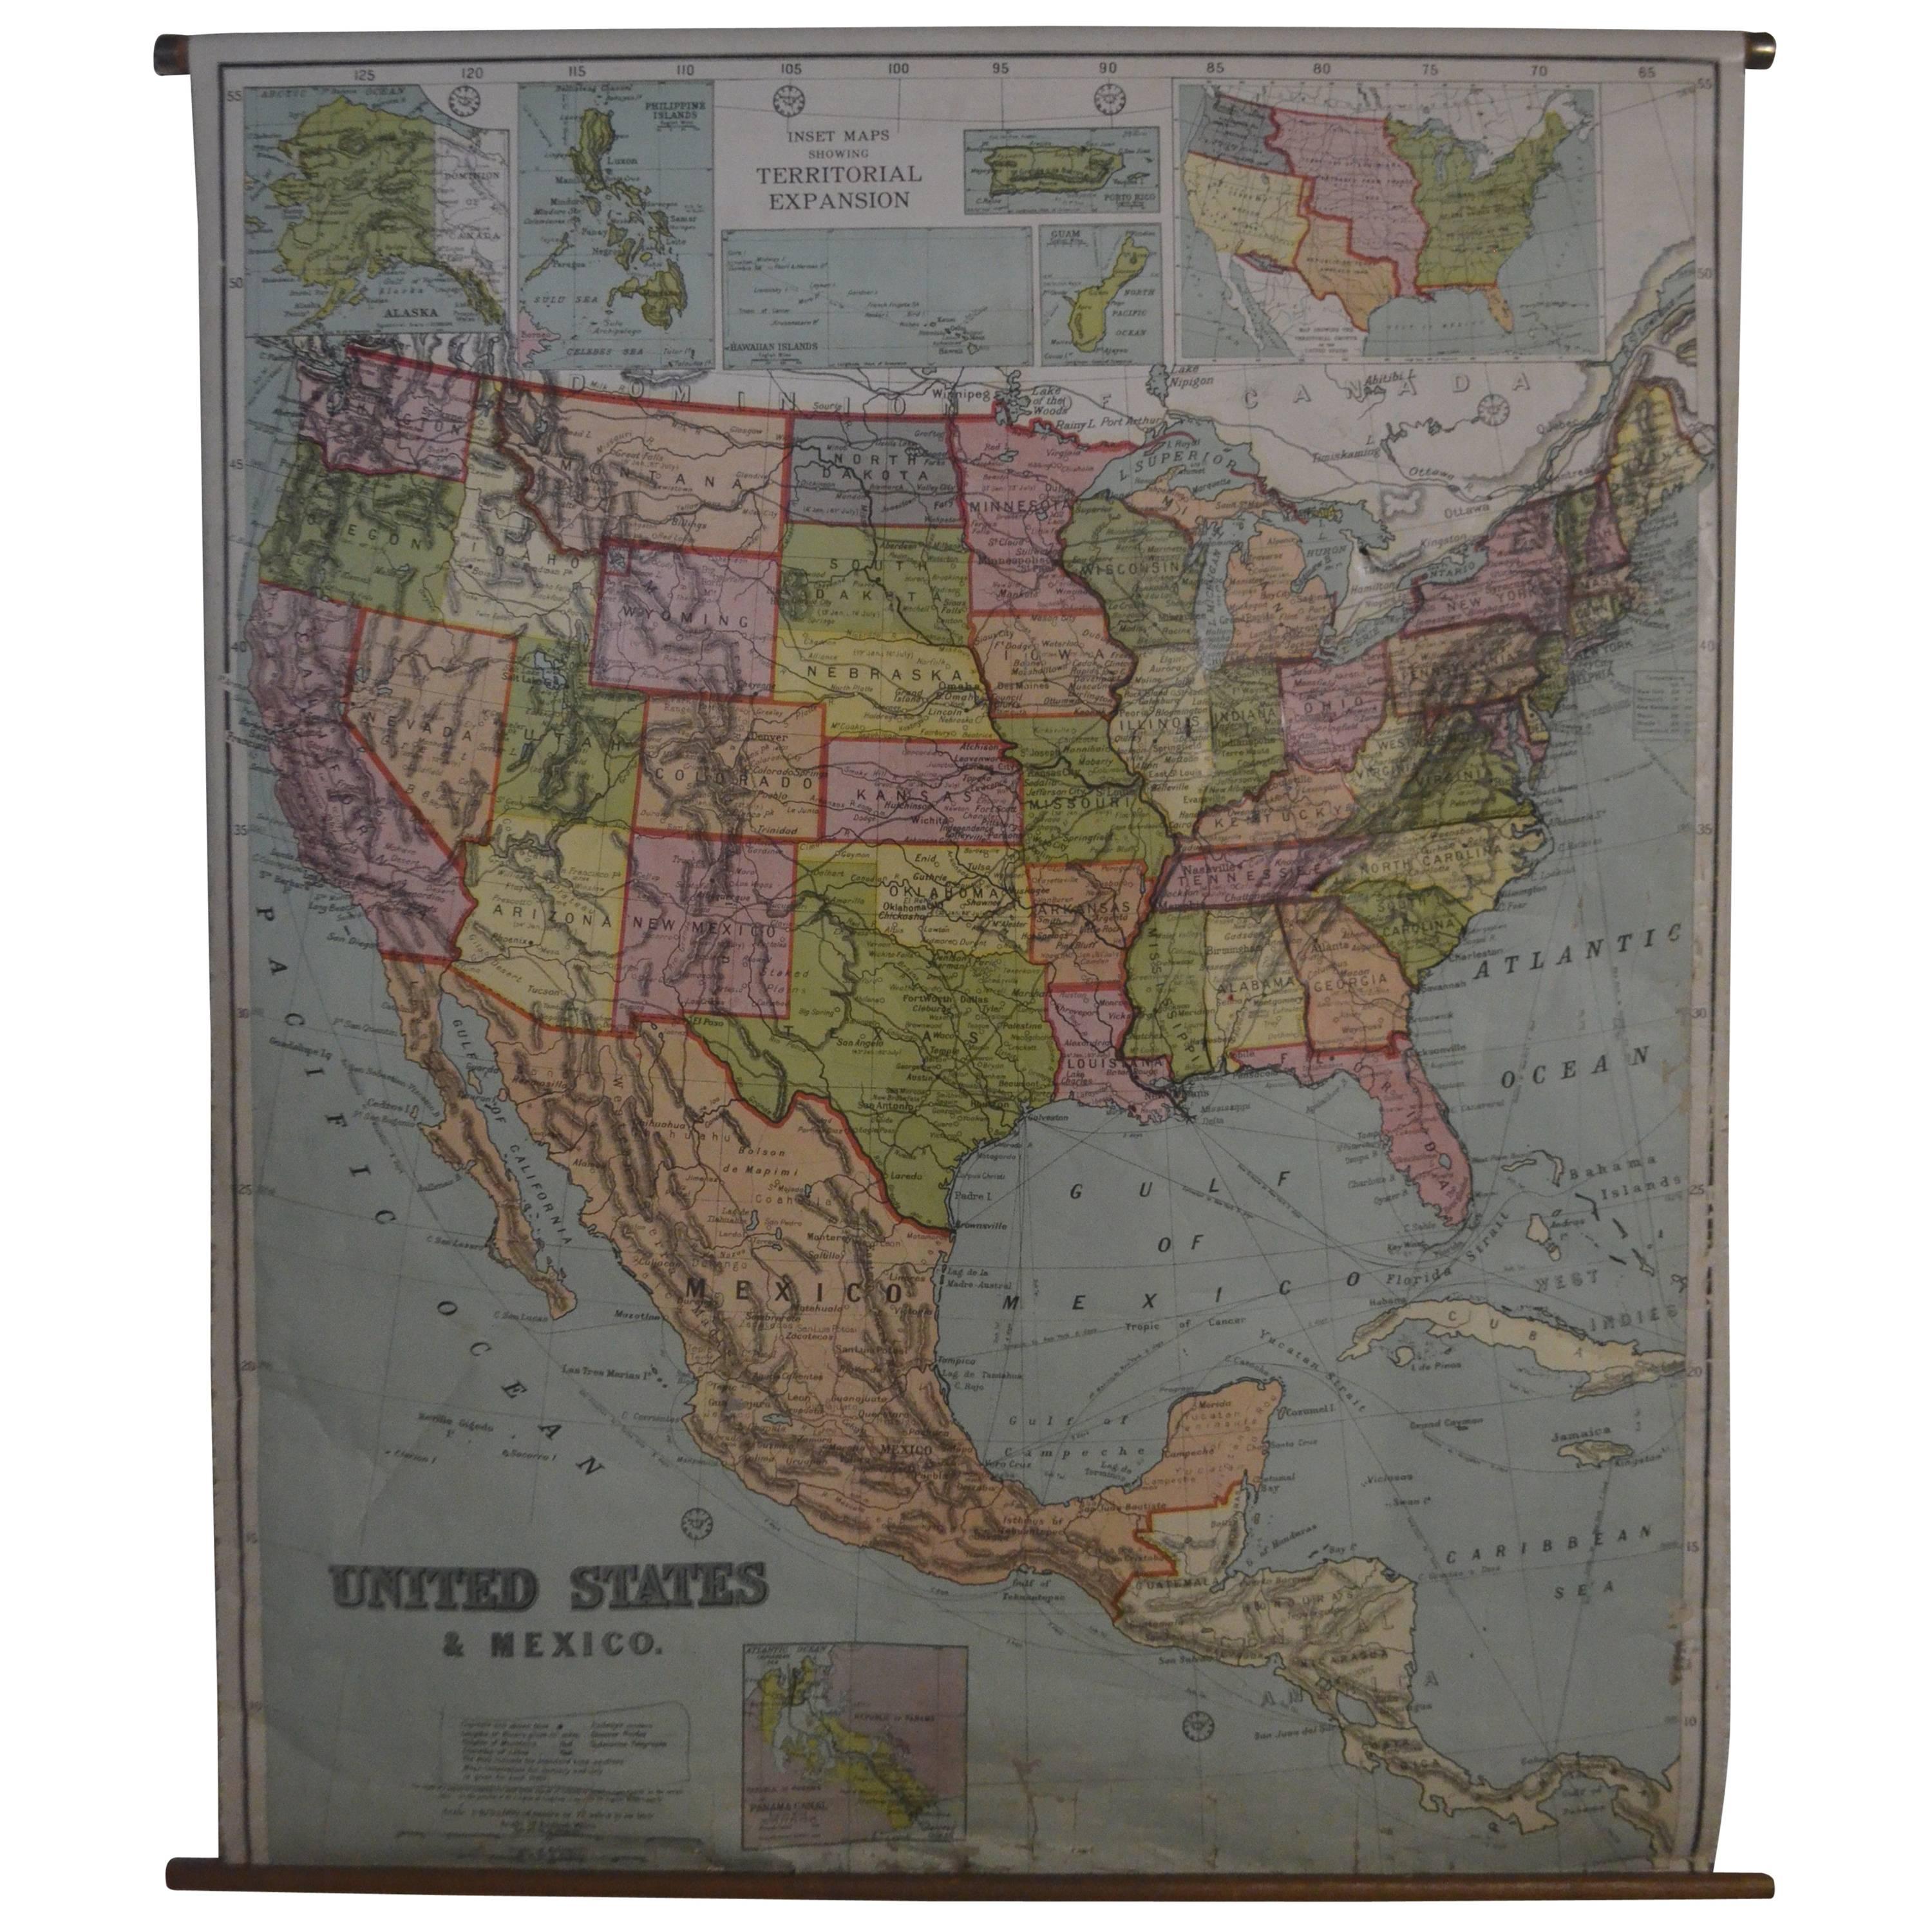 Early 20th Century Map of the United States and Mexico, 1916 Edition